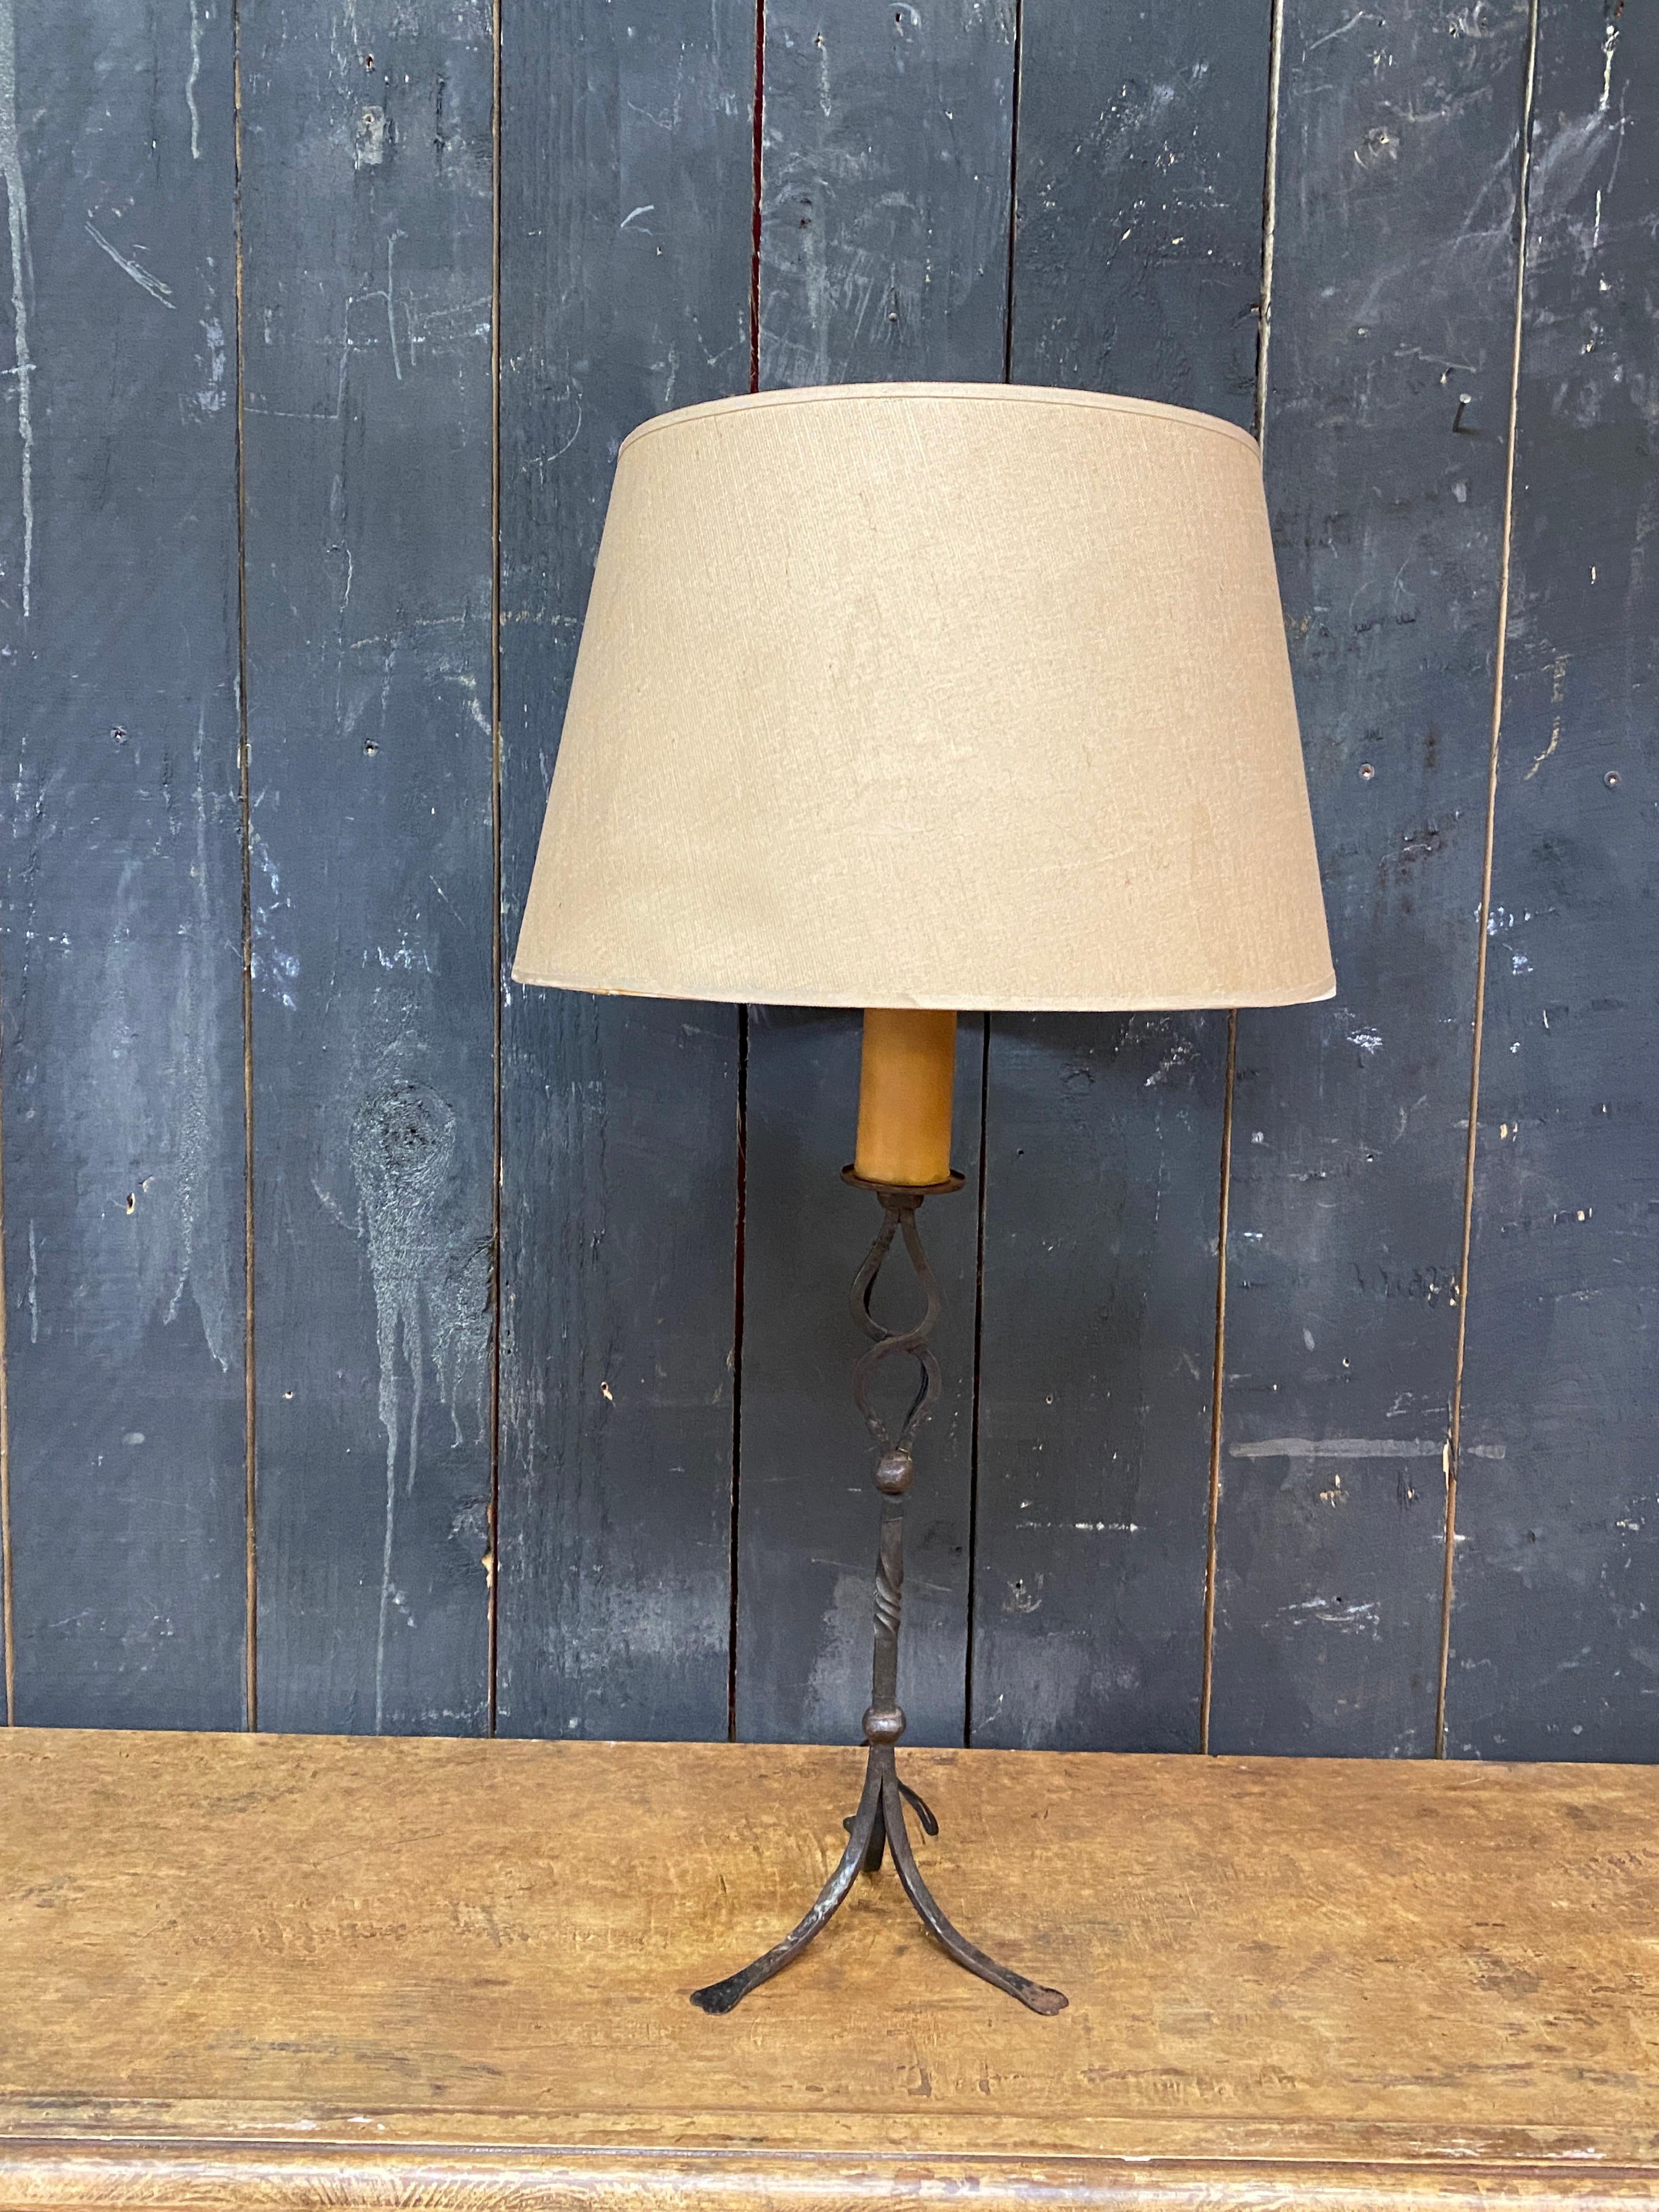 Folk Art, table lamp  in wrought iron circa 1950
h : 58 and 76 cm